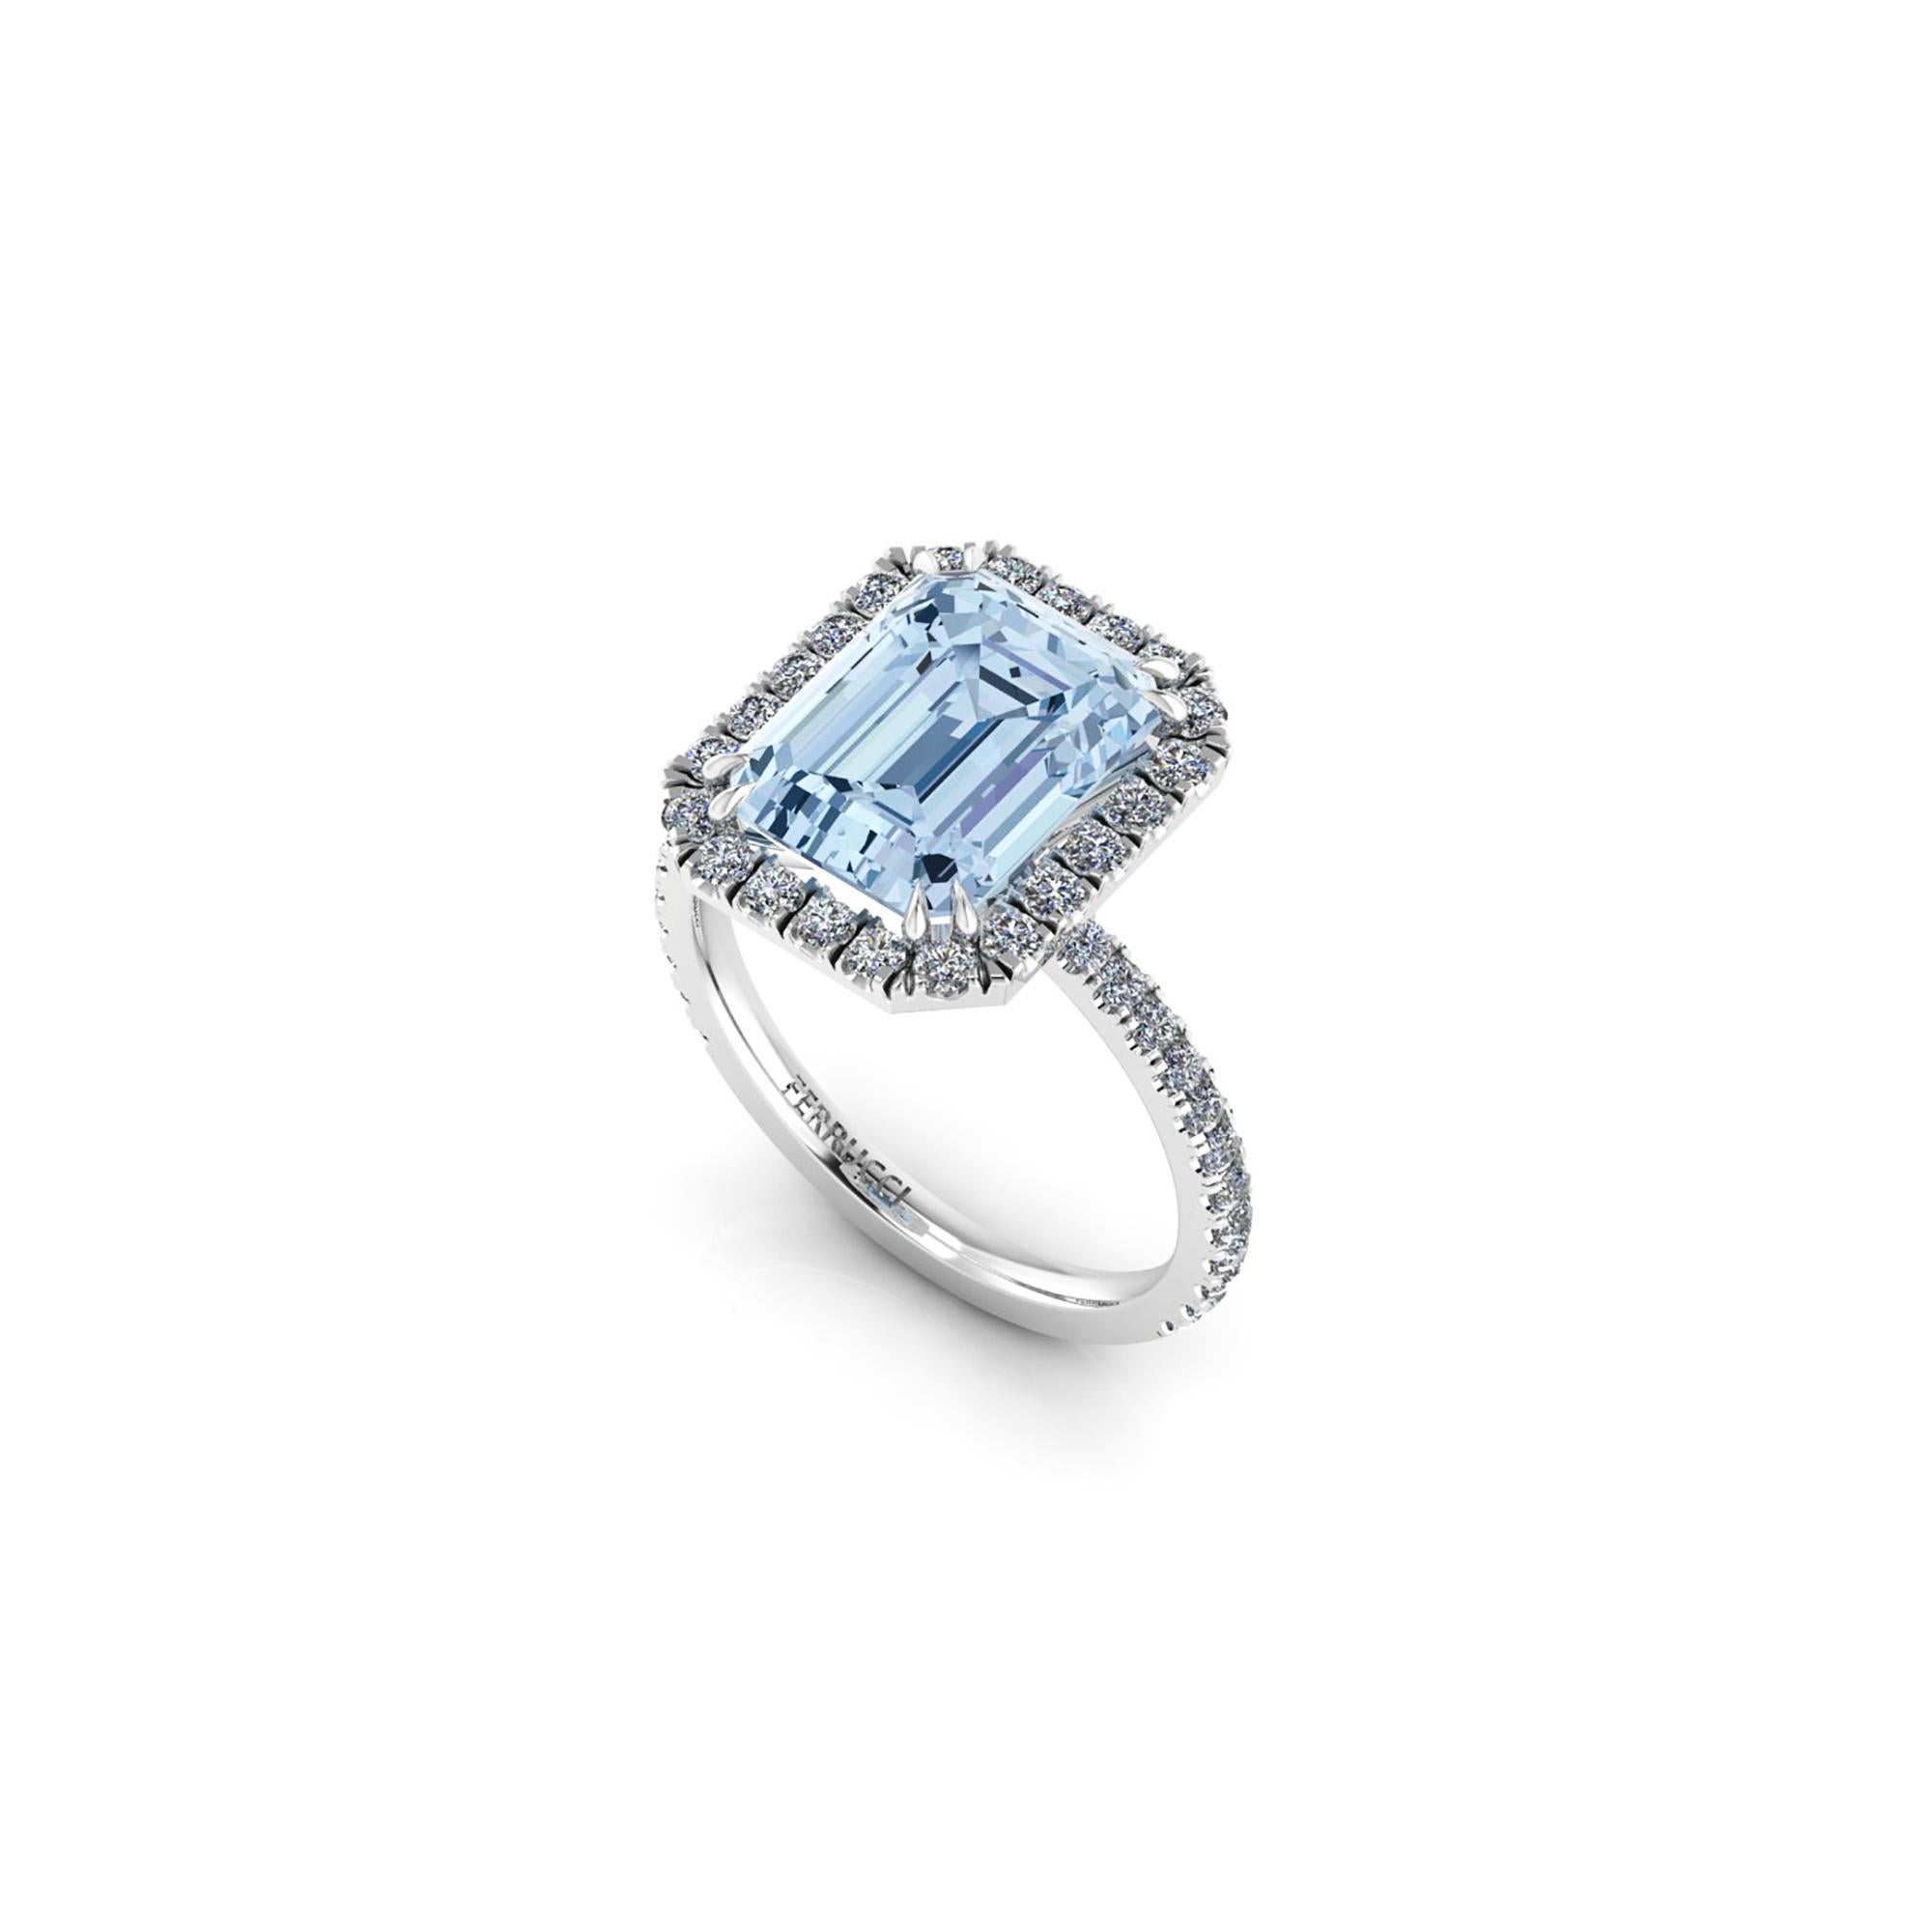 An exquisite 4.61 carat Aquamarine, emerald cut, very high quality color, eye clean gem, set with double claw prongs, embellished by a Halo of bright diamonds of approximately  total carat weight of 0.65 carat, set in an hand crafted, delicate and